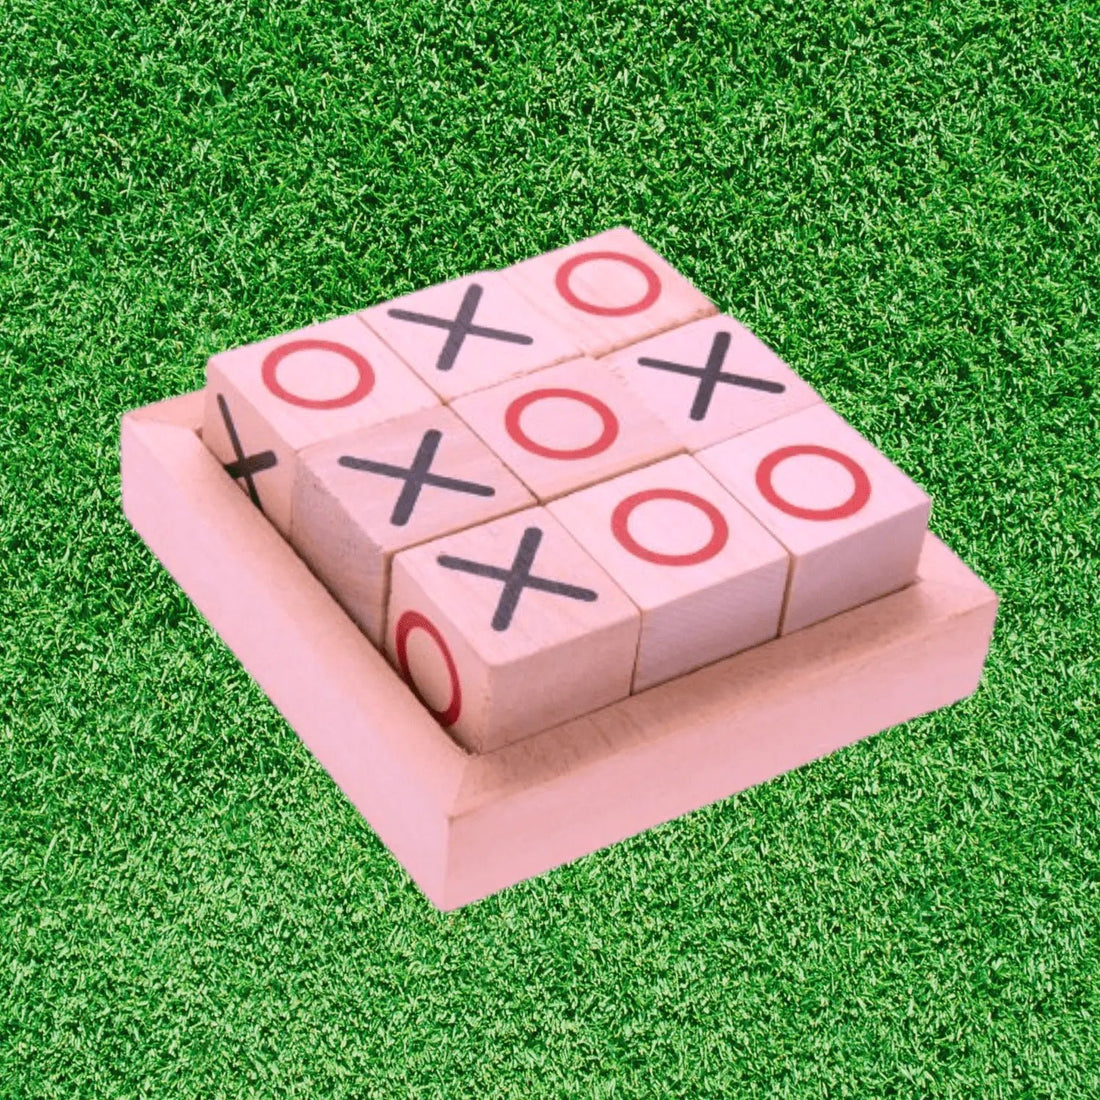 Tic tac toe – XOXO Naught & Crosses | Wooden Board Games Handmade Nought and Crosses - MyLittleTales